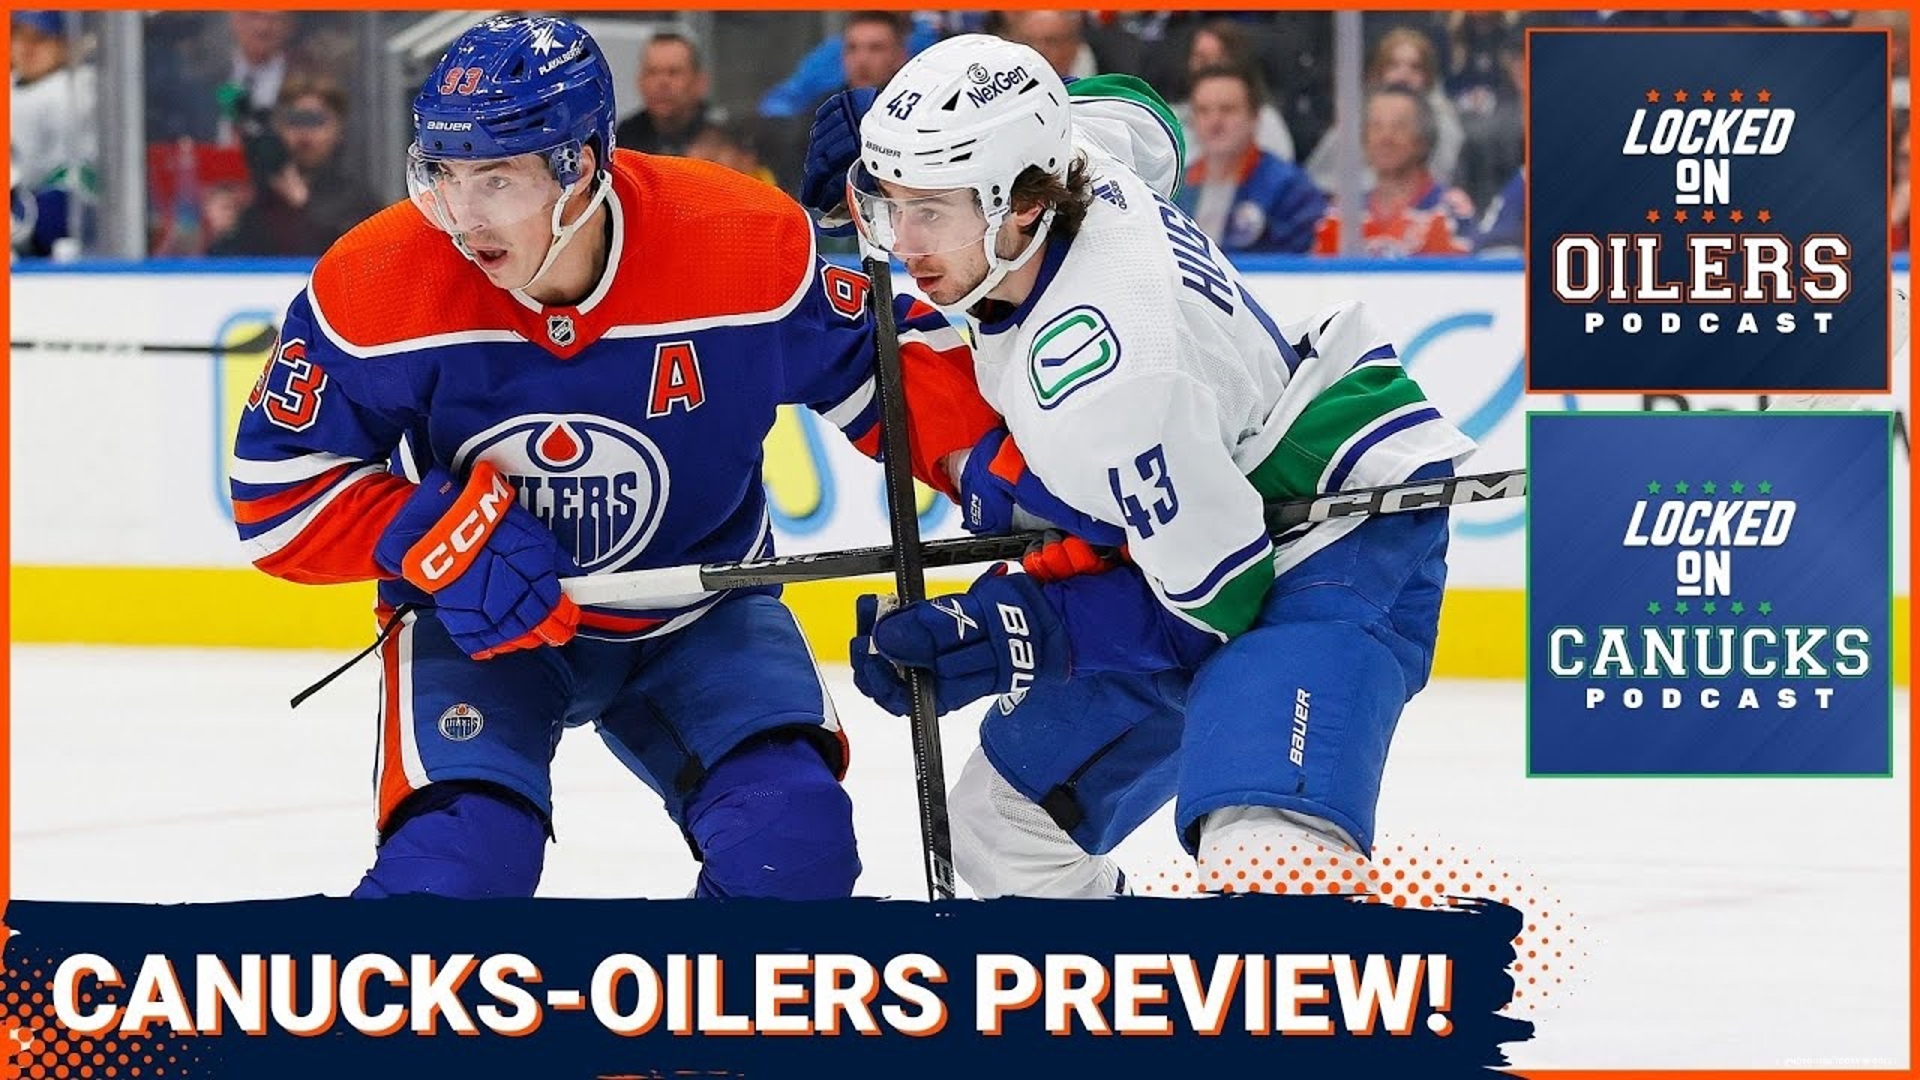 The Edmonton Oilers are set to take on the Vancouver Canucks in the second round of the NHL playoffs Wednesday May 8th.